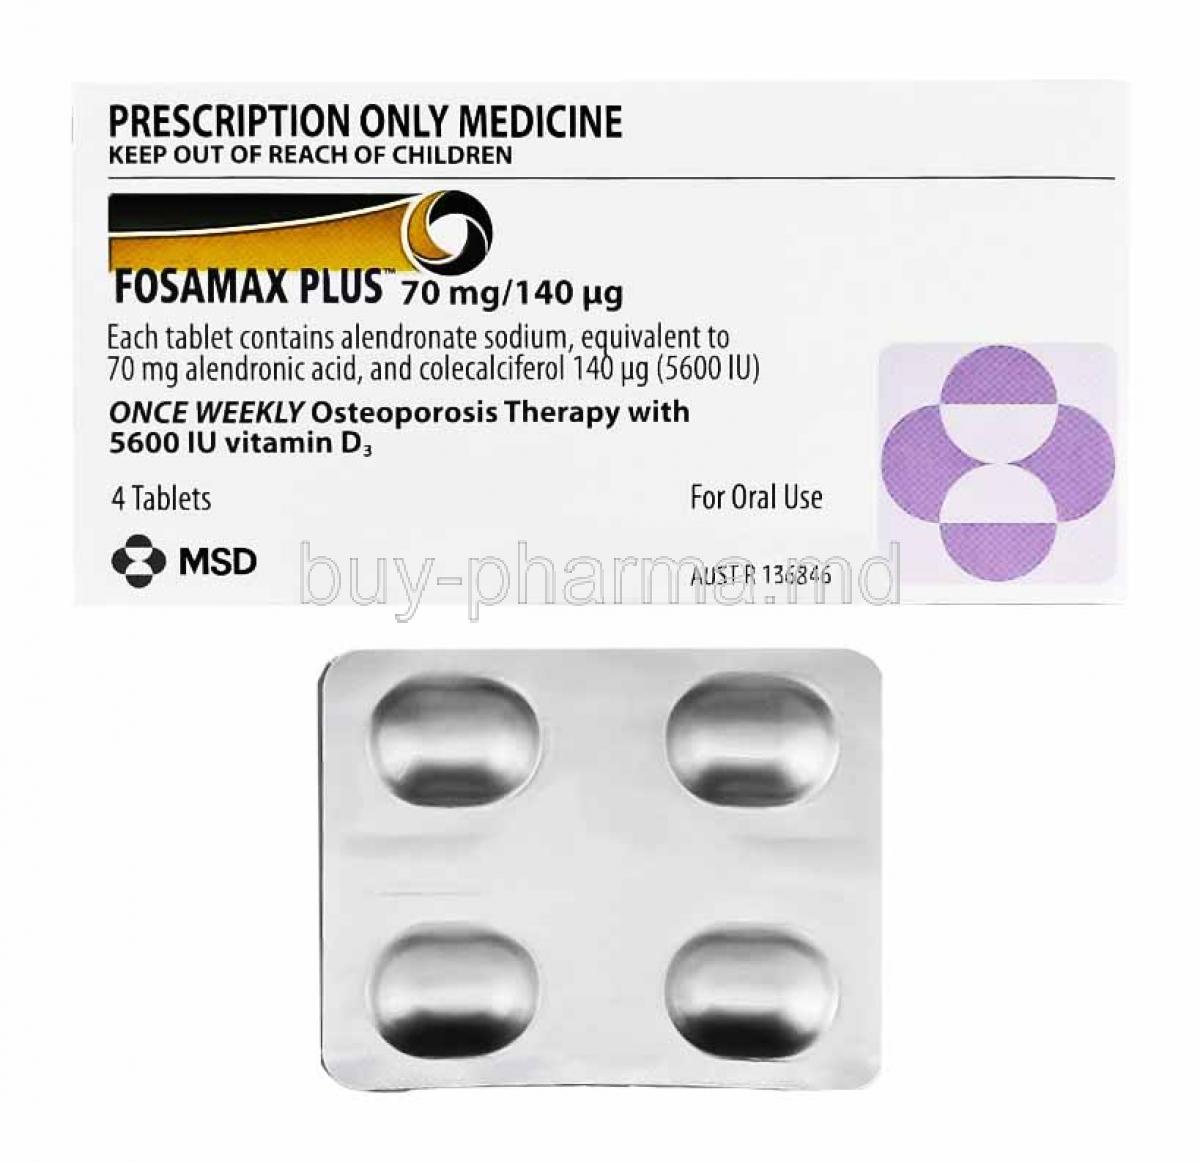 Fosamax Plus, Alendronic Acid and Cholecalciferol box and tablets